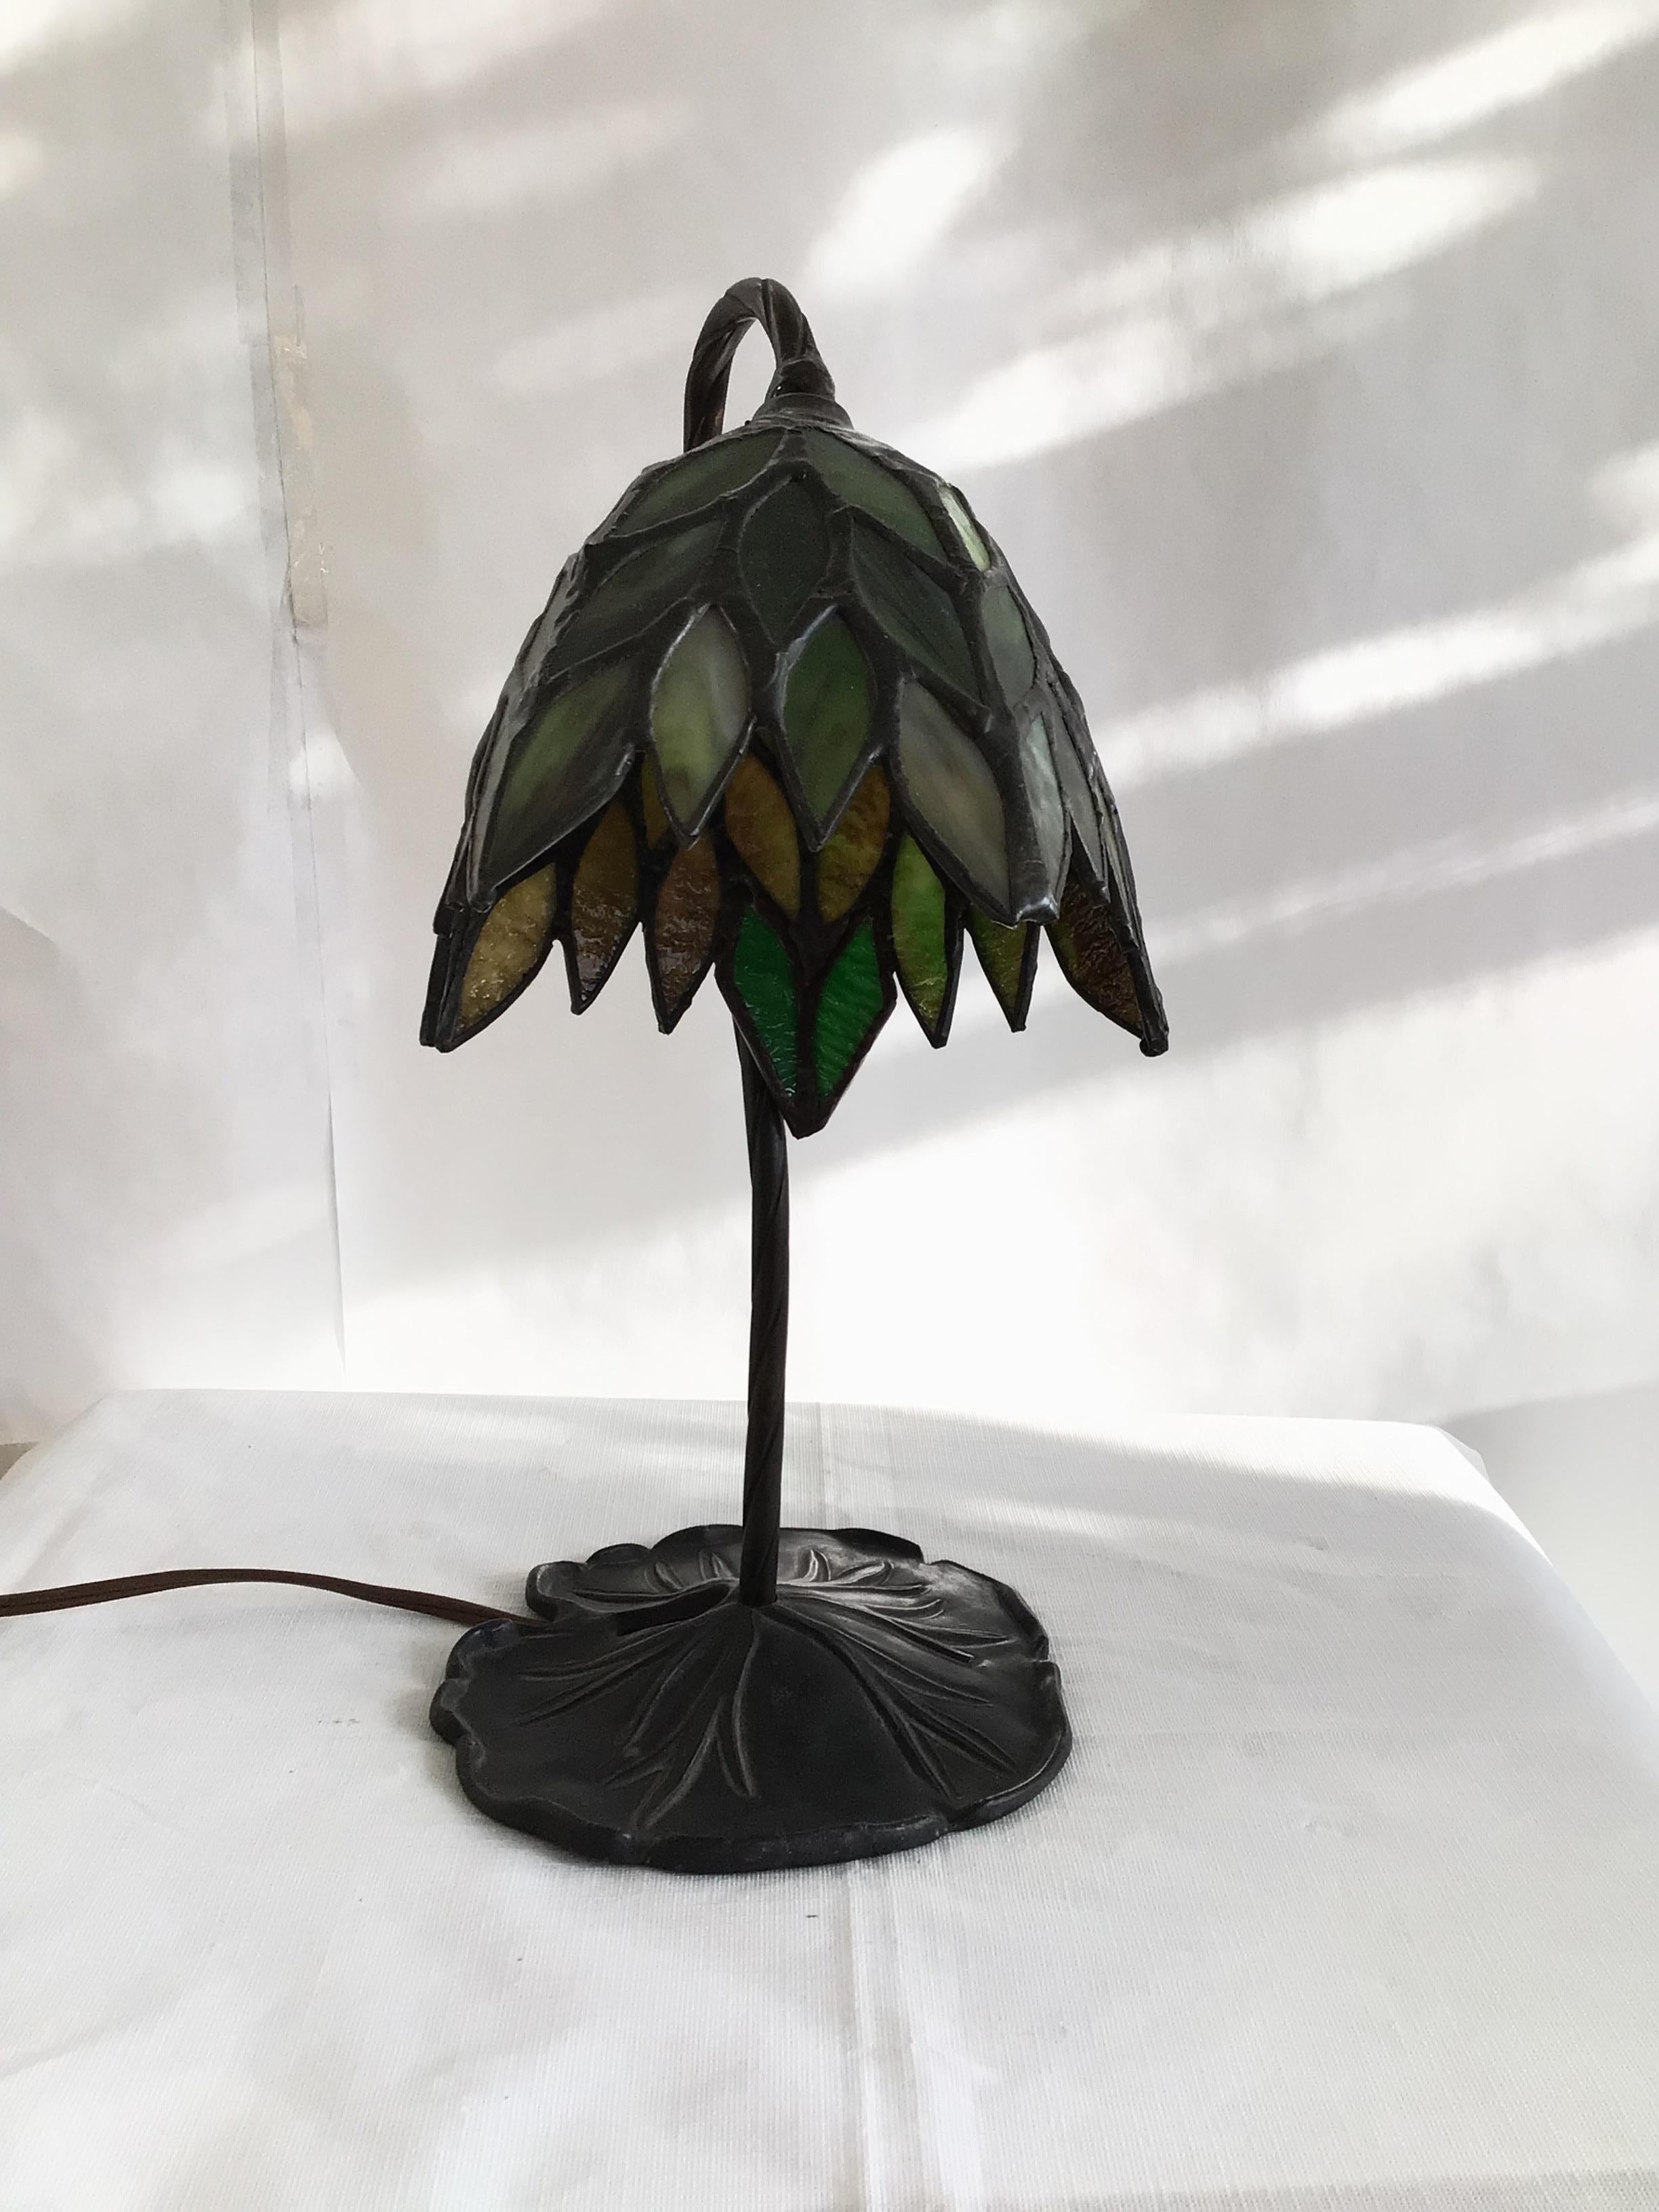 1960s Leaded Stained Glass Desk Lamp on a Lily Pad Metal Base
Needs rewiring
Colors: Green, Black Bronze.